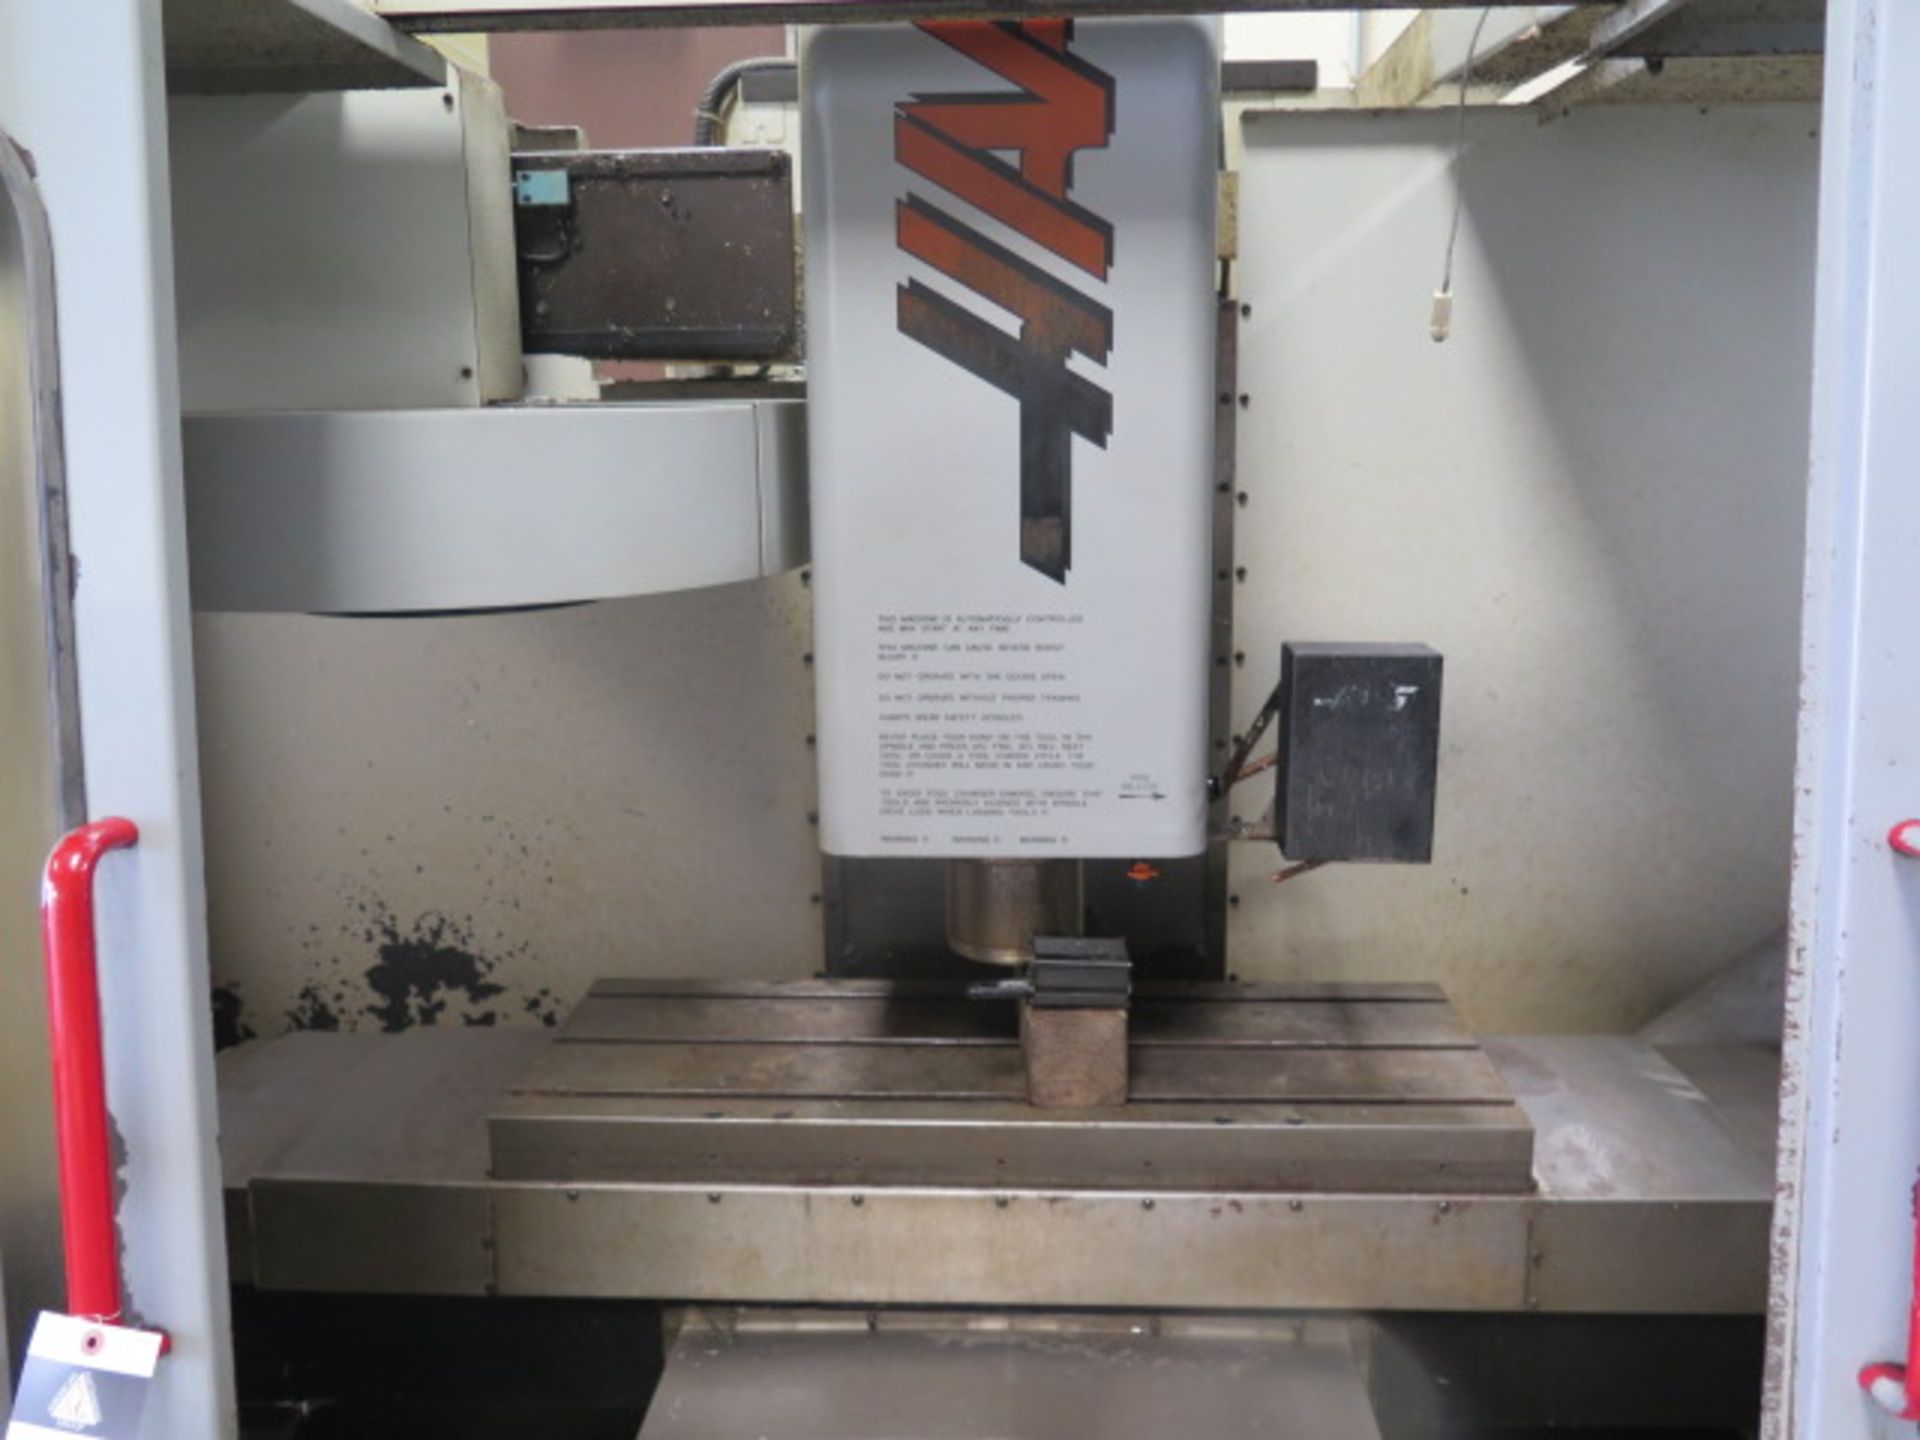 1998 Haas VF-2 4-Axis CNC VMC s/n 14672 w/ Haas Controls, 20-Station ATC, SOLD AS IS - Image 7 of 22